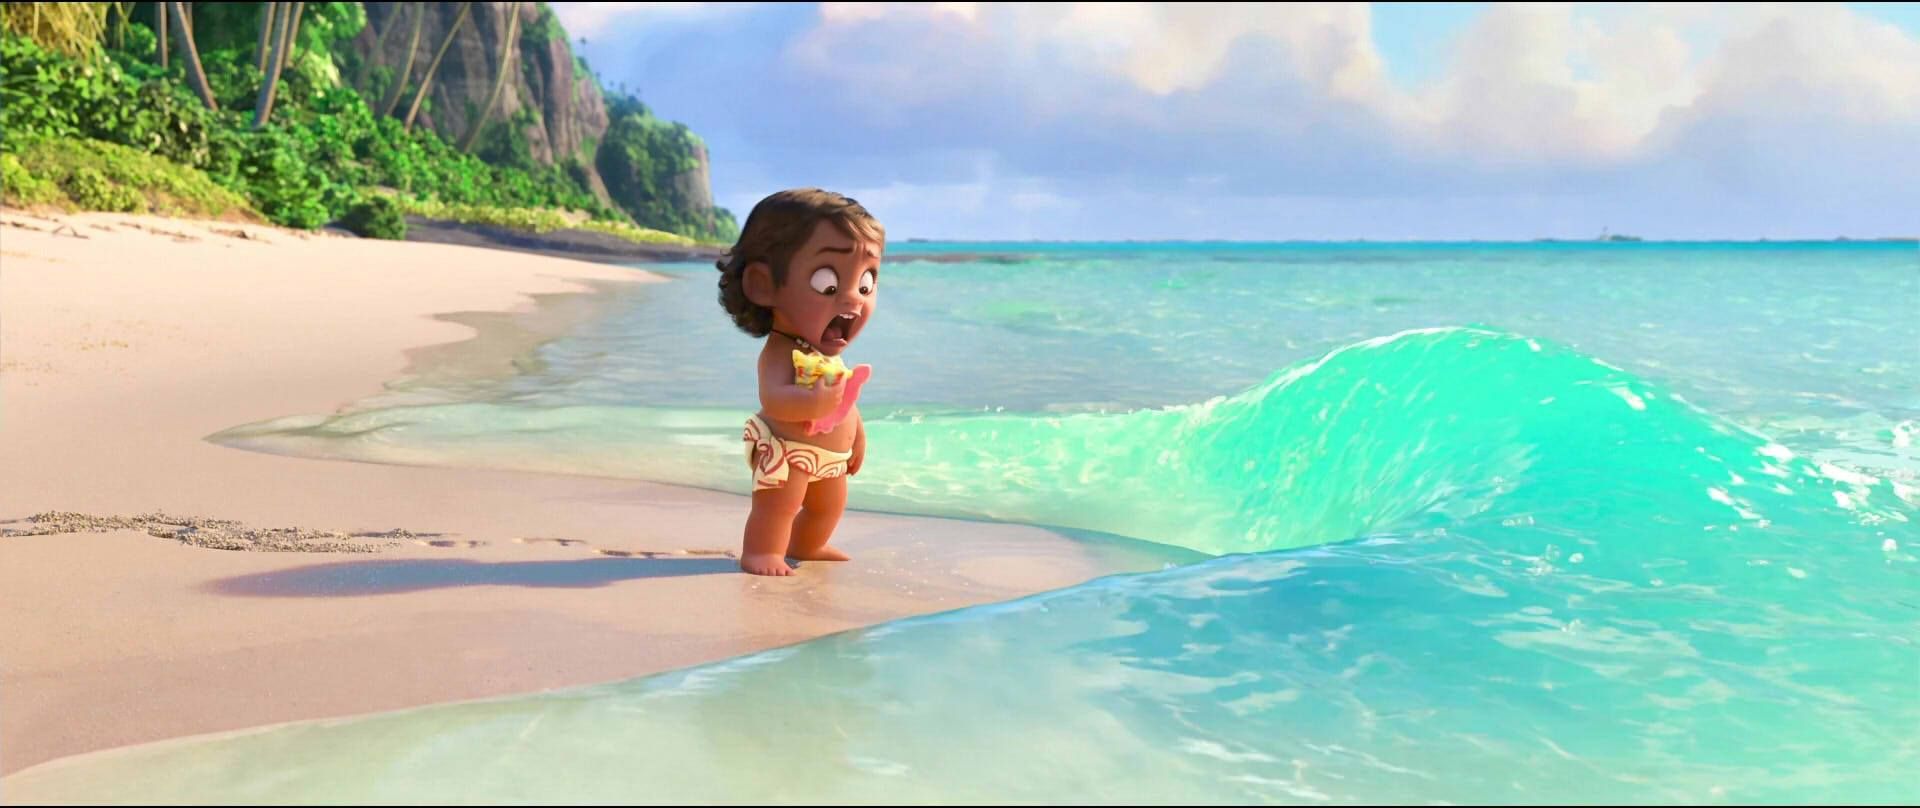 A Friend Did This Edit Of Baby Moana When She Saw Her In The New Wreck It Ralph 2. Disney Image, Moana, Moana Background